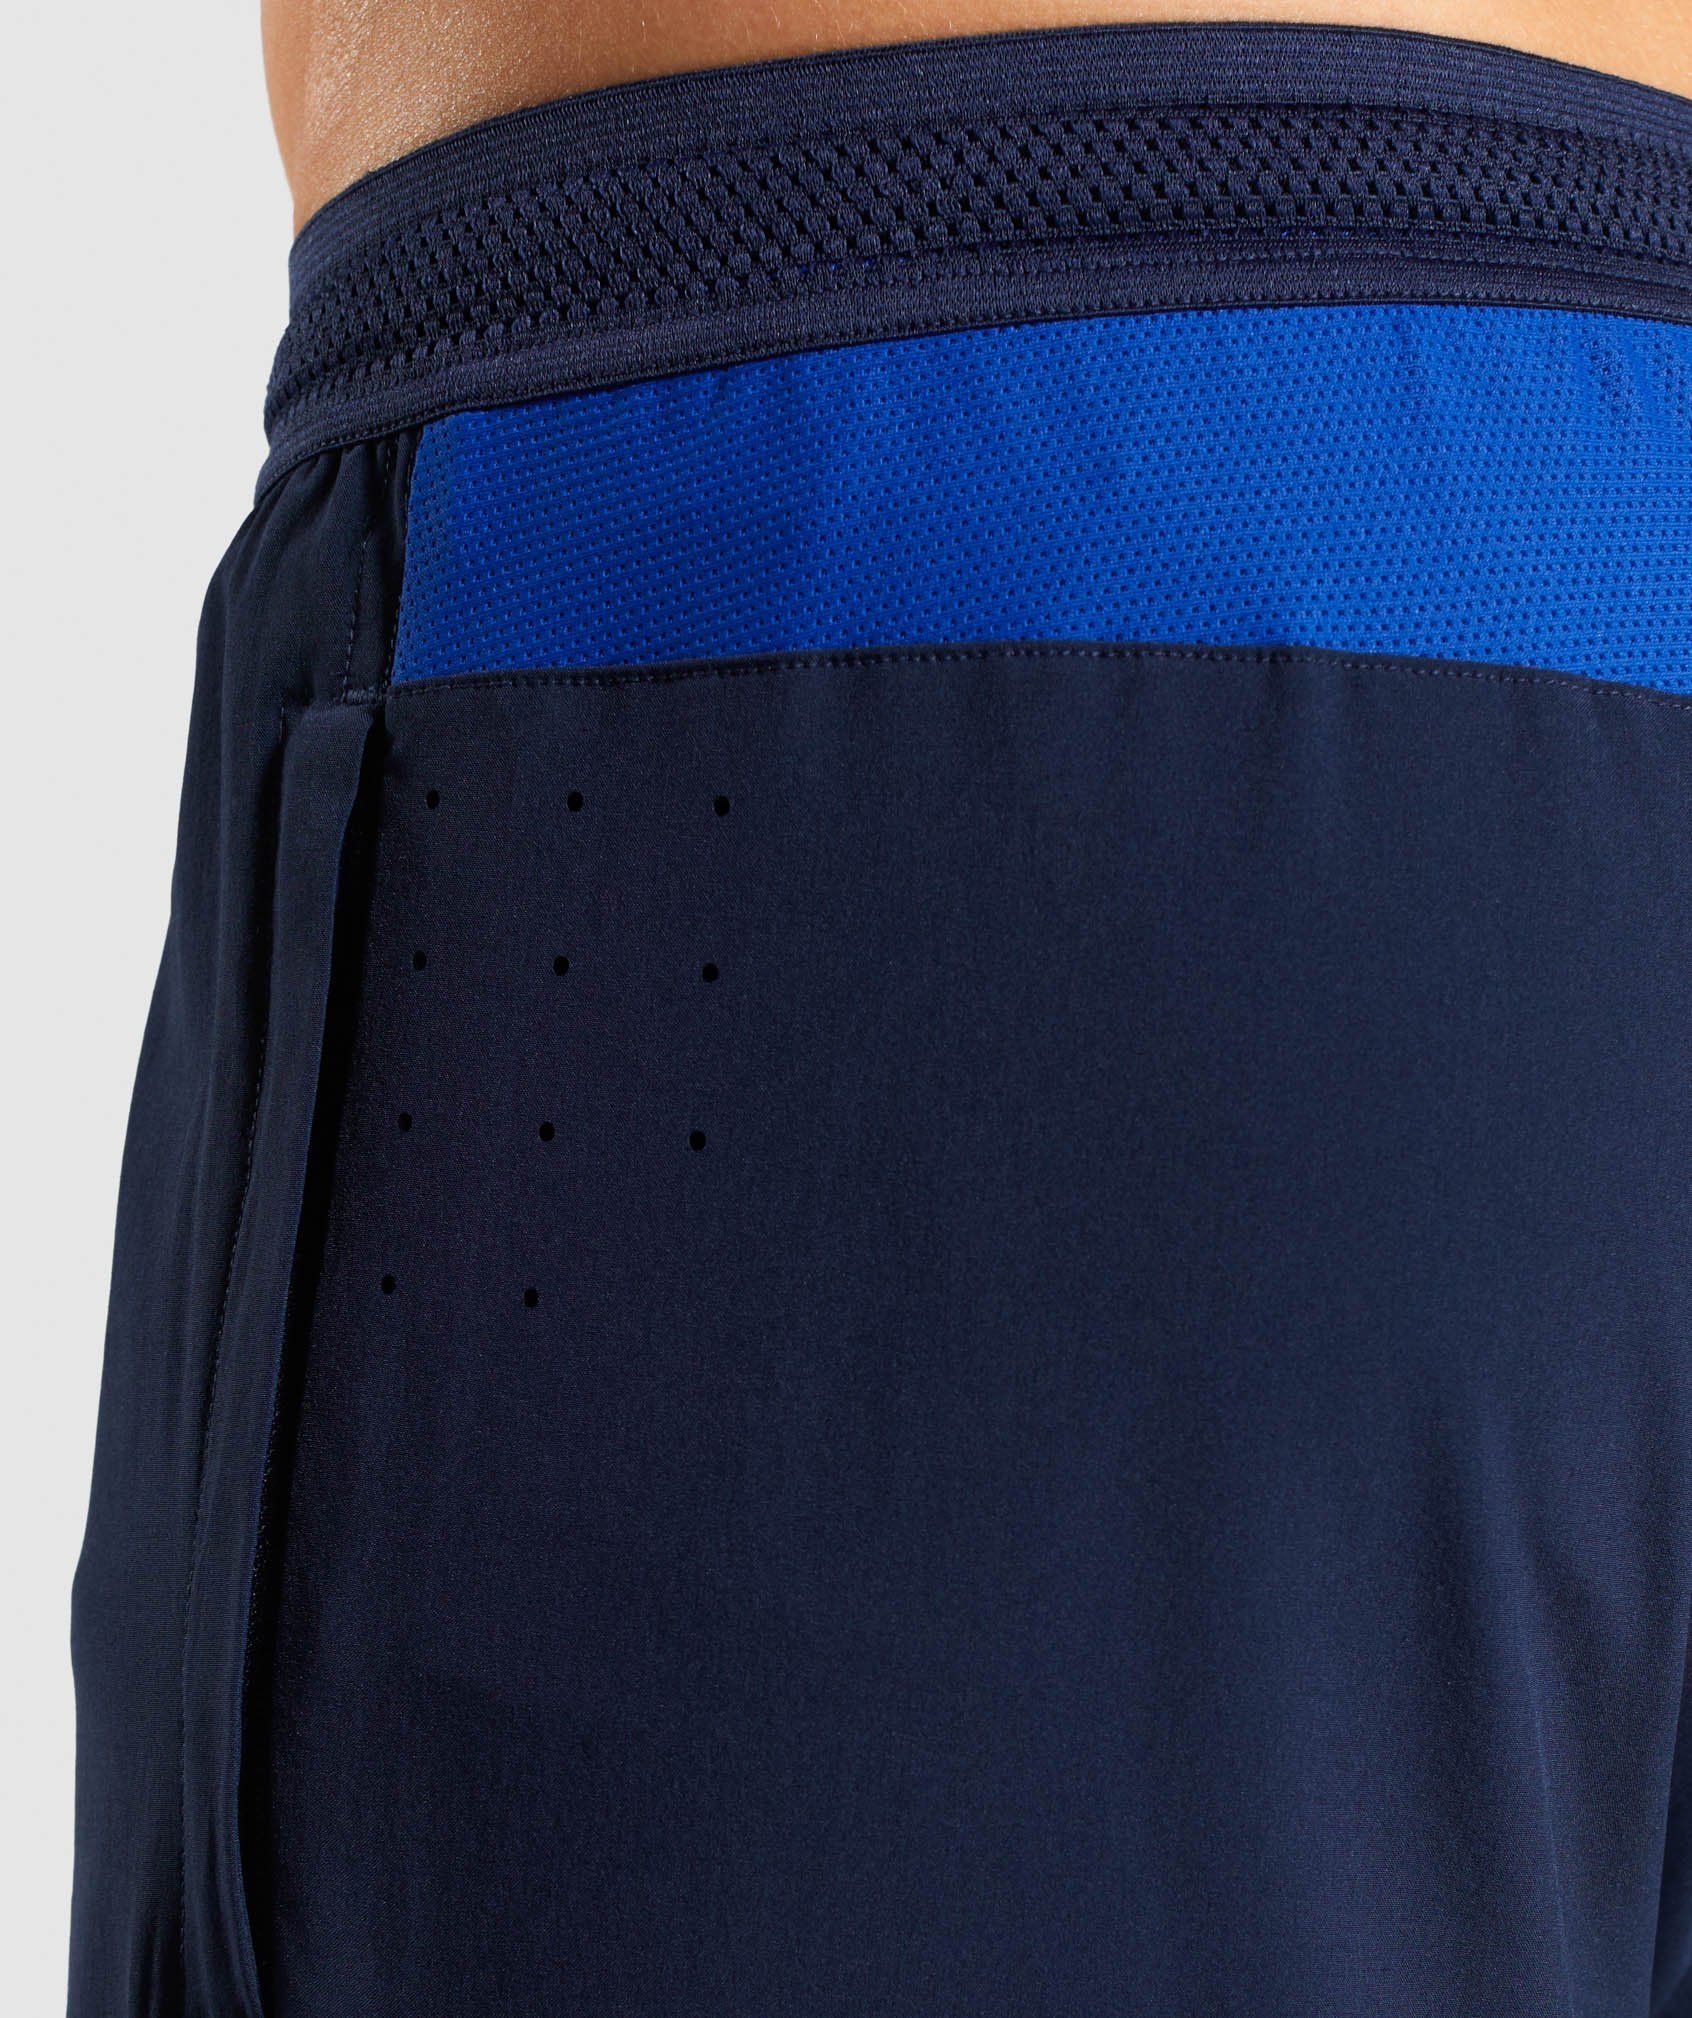 Speed Shorts in Blue - view 5